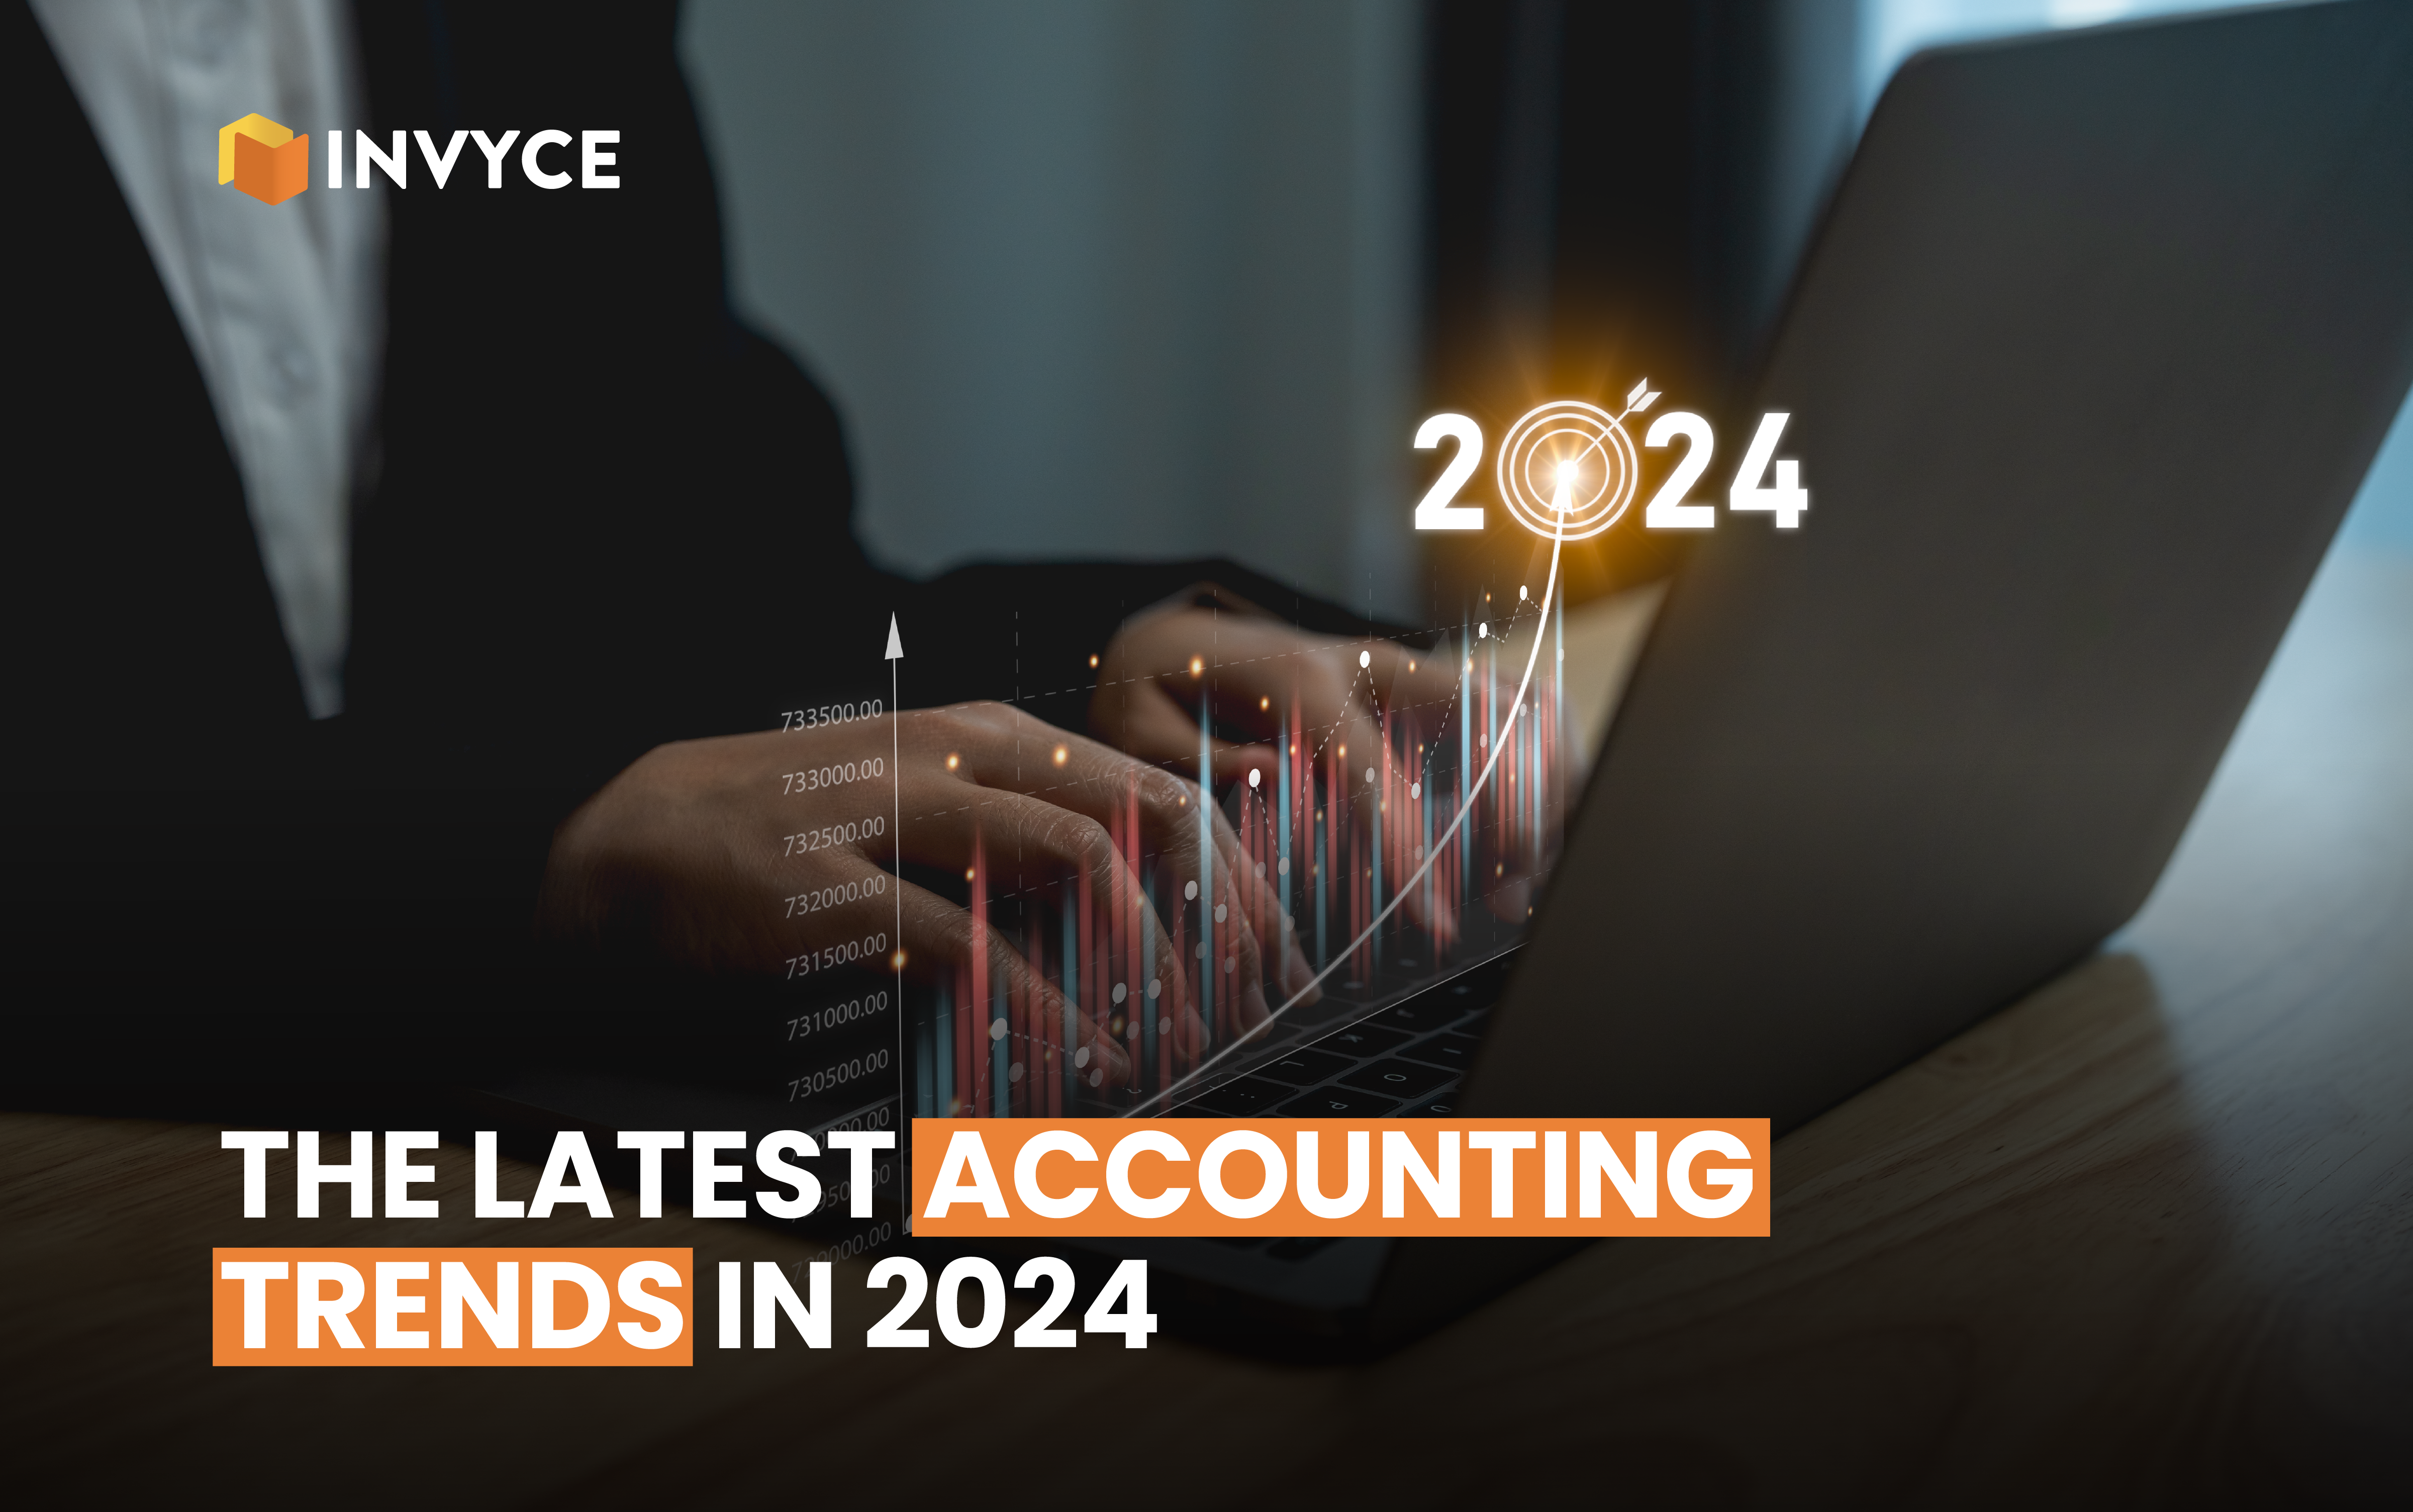 #The Latest Accounting Trends in 2024